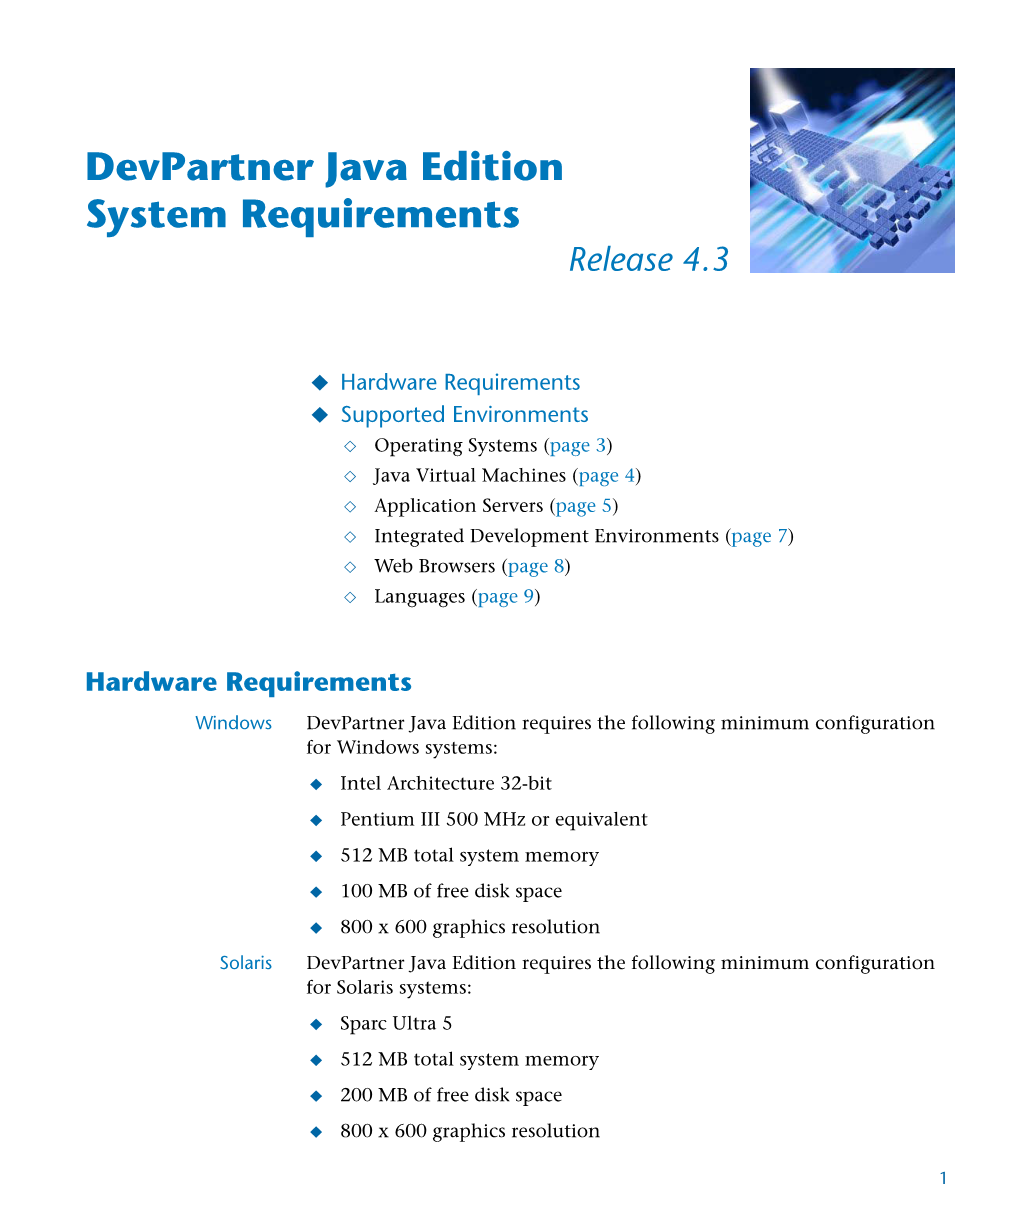 Devpartner Java Edition Supported Environments